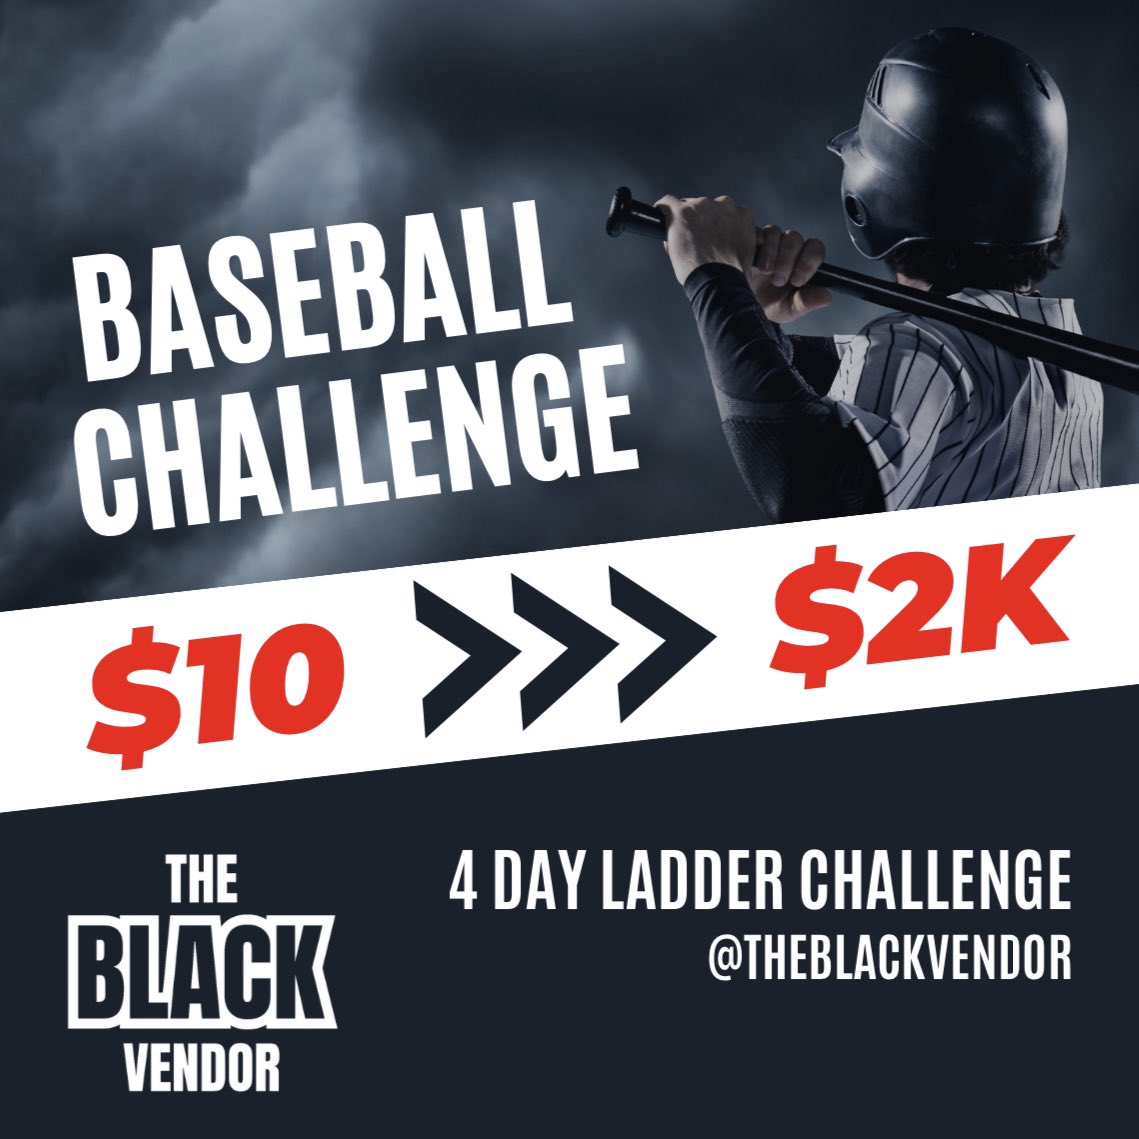 ⚾️🔥 Join my $2k MLB Ladder Challenge! 🚀💰

I’m turning $10 into $2k in just 4 days with my expert baseball picks. Don’t miss out on this exciting opportunity! Let’s climb together! #MLB #LadderChallenge #GamblingTwitter 

Discord Link —> discord.gg/UZtMuYgFRK